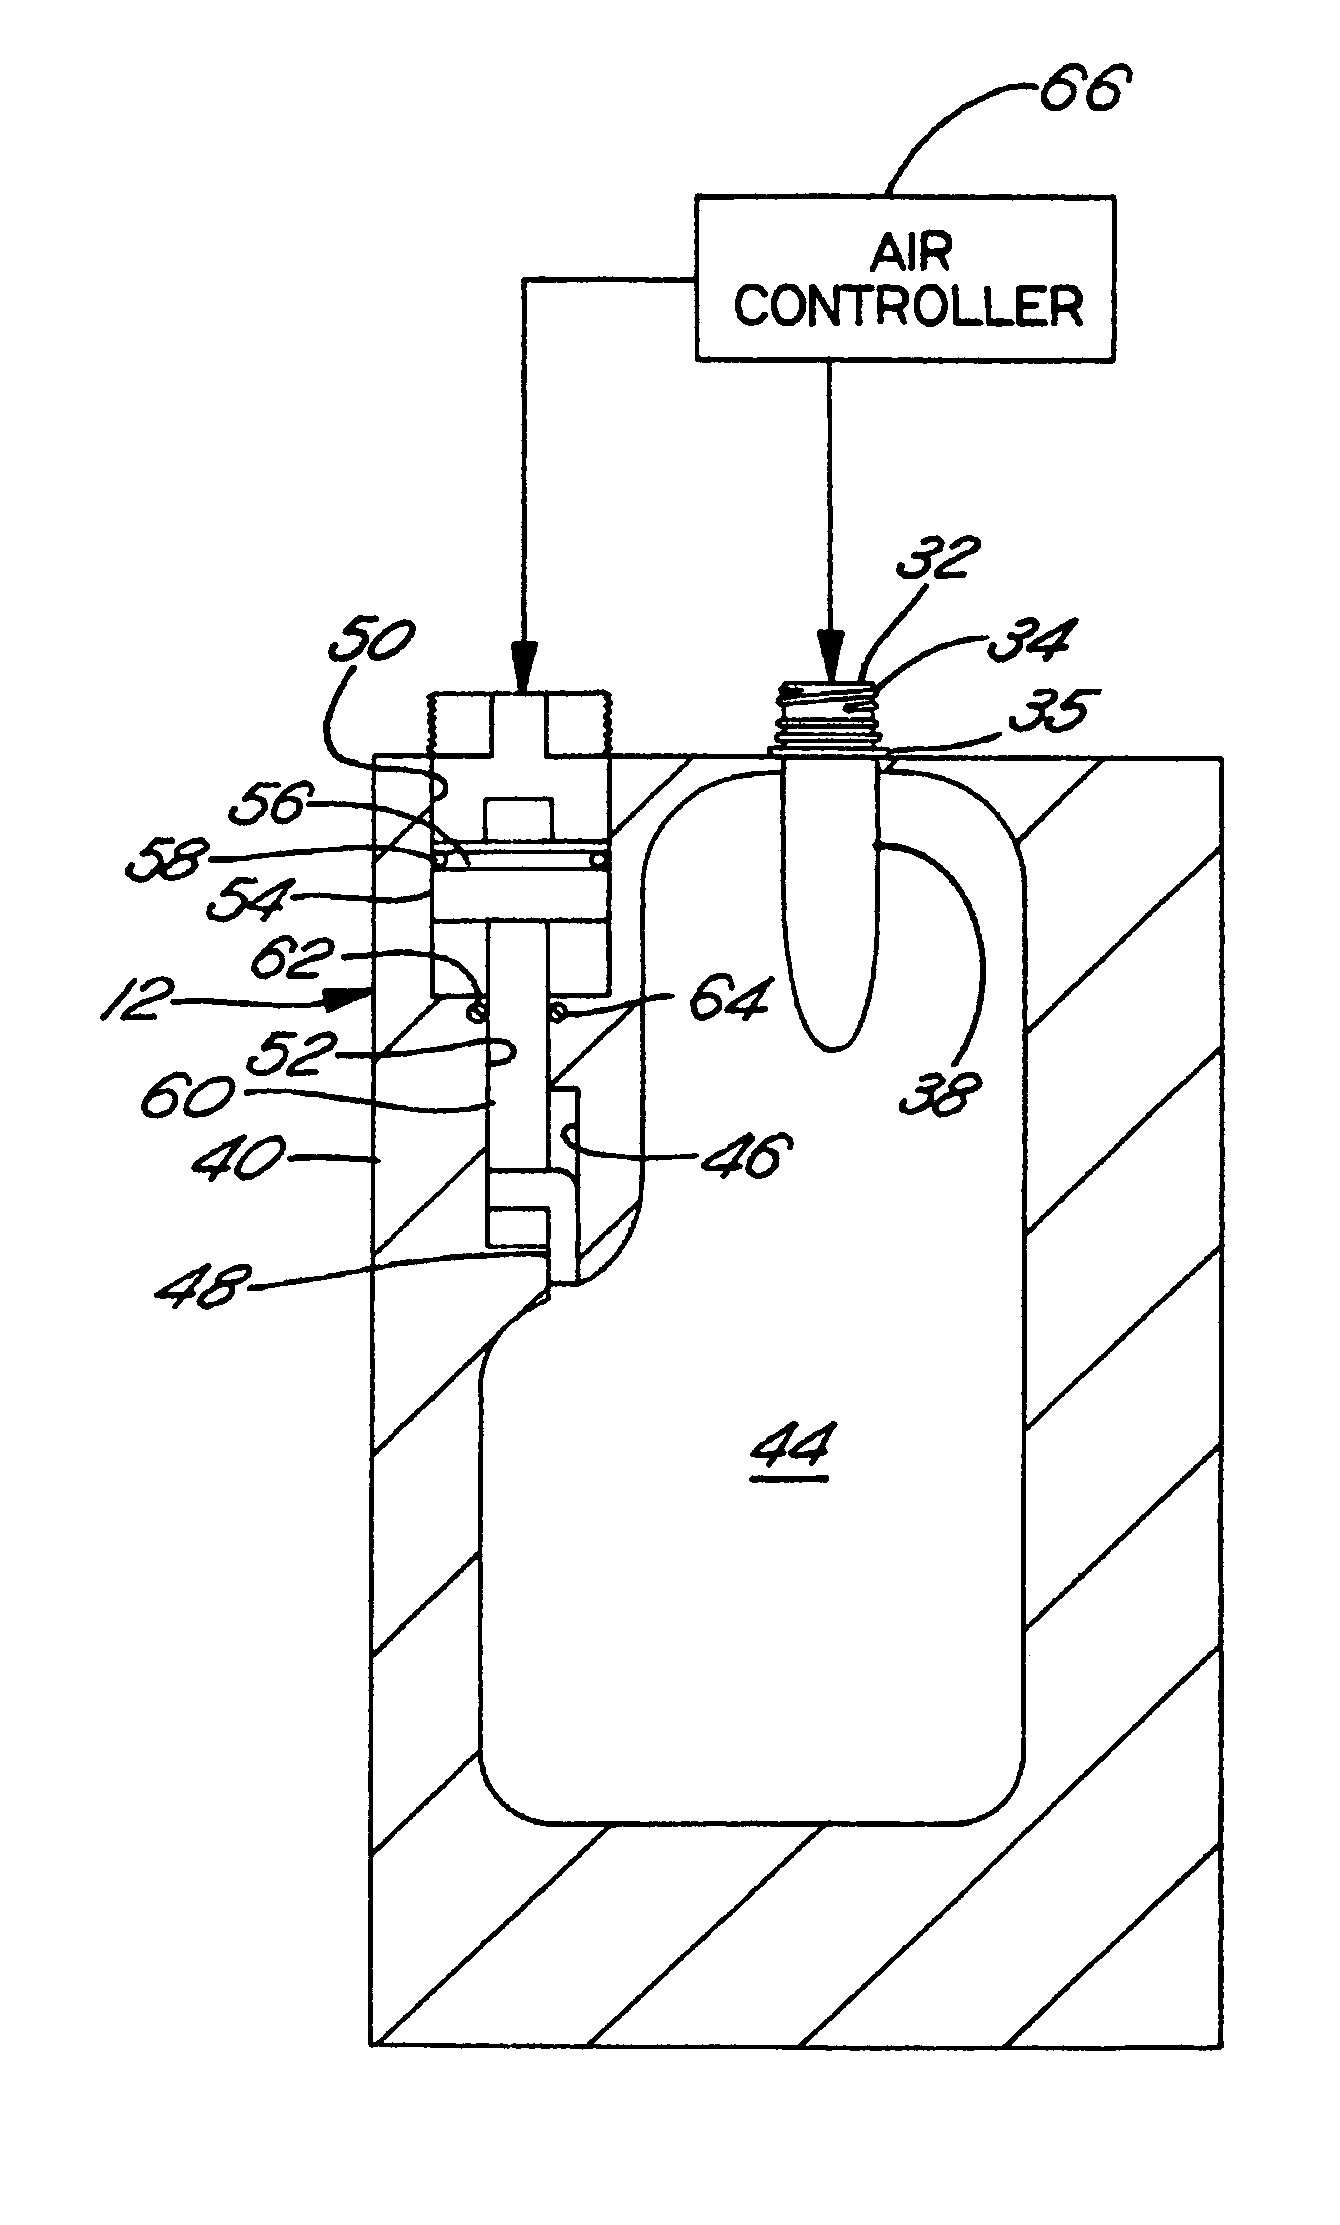 Method of reheat blow molding a container